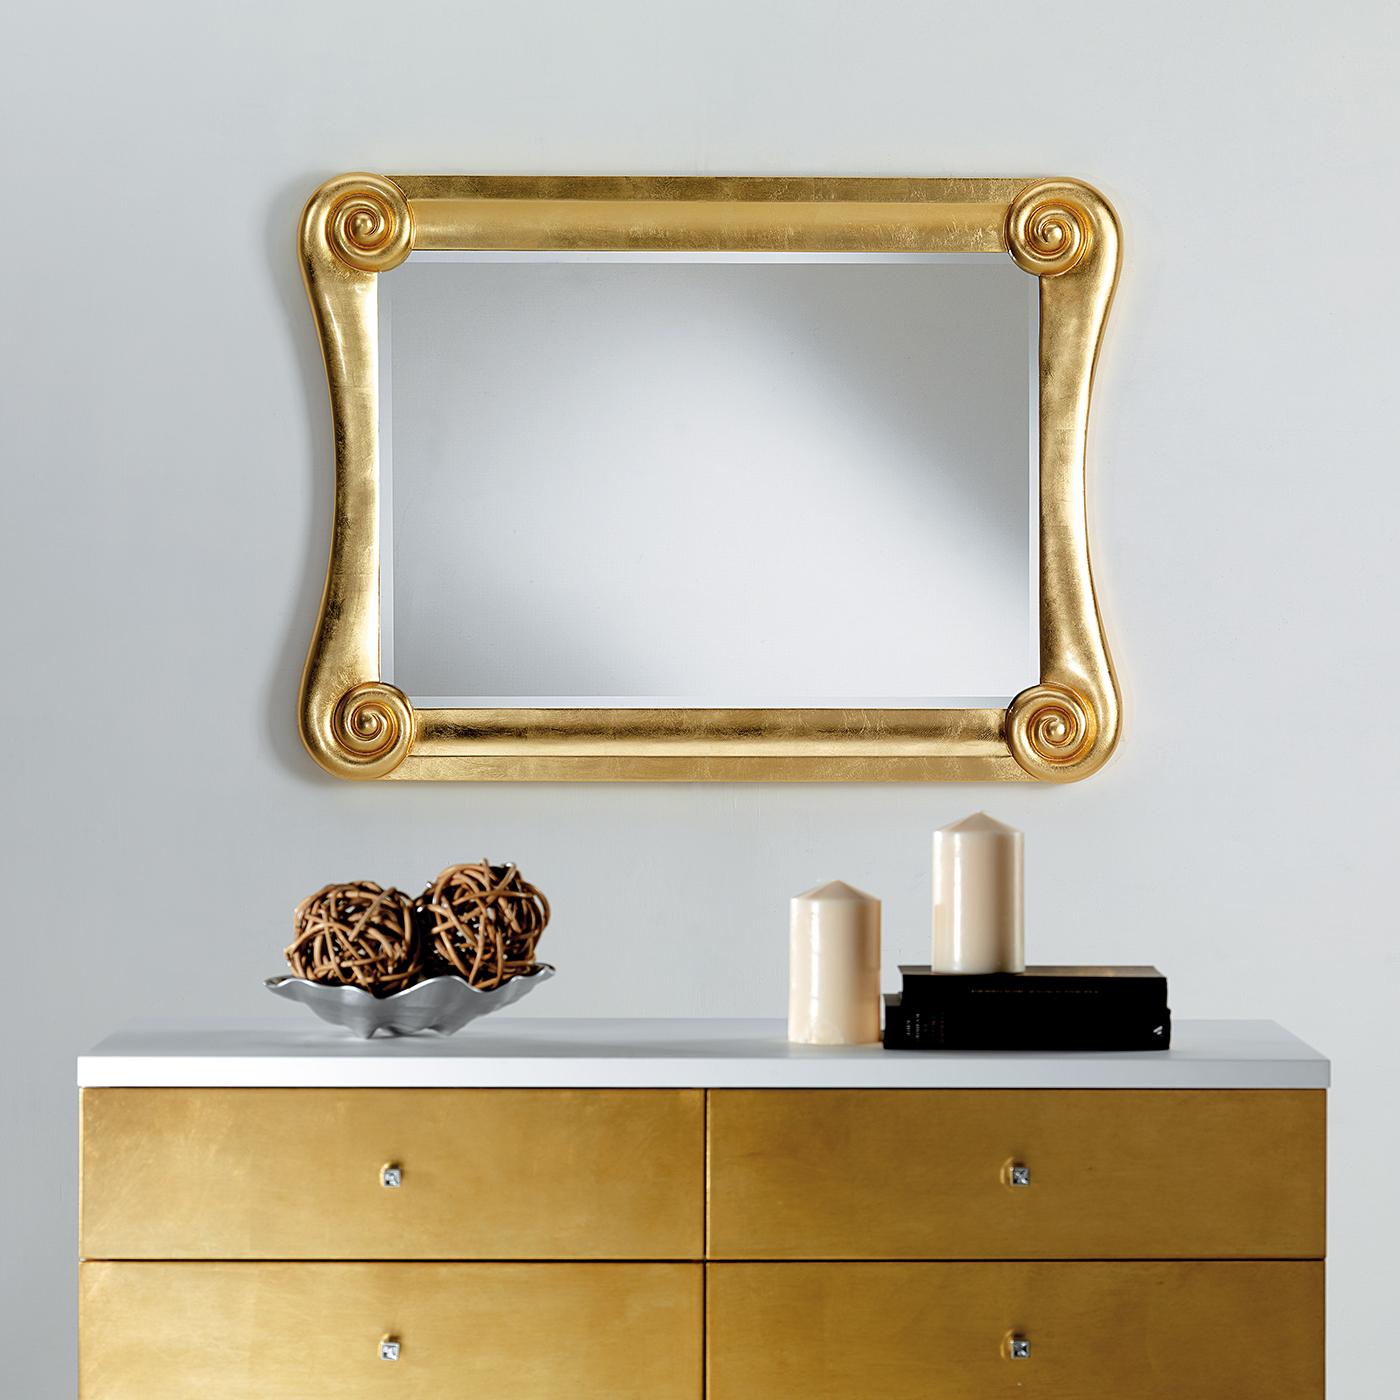 Boasting a fascinating silhouette enriched with neoclassic decorations, this rectangular wall mirror will be a precious addition to luxe decors. The wooden frame (14 cm large and 8 cm thick) is covered with gold leaf and showcases volutes in Ionic